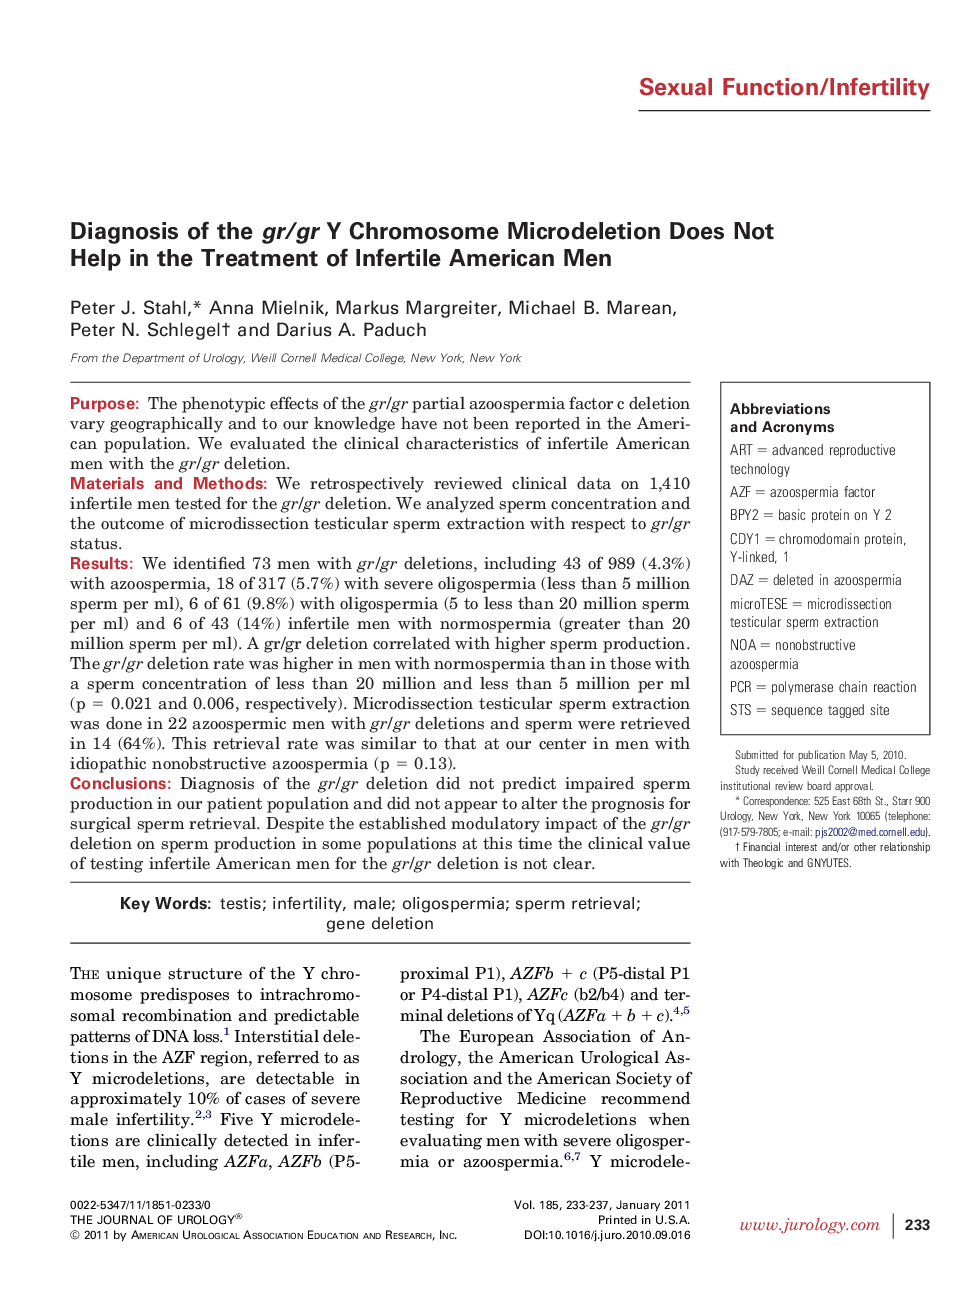 Diagnosis of the gr/gr Y Chromosome Microdeletion Does Not Help in the Treatment of Infertile American Men 